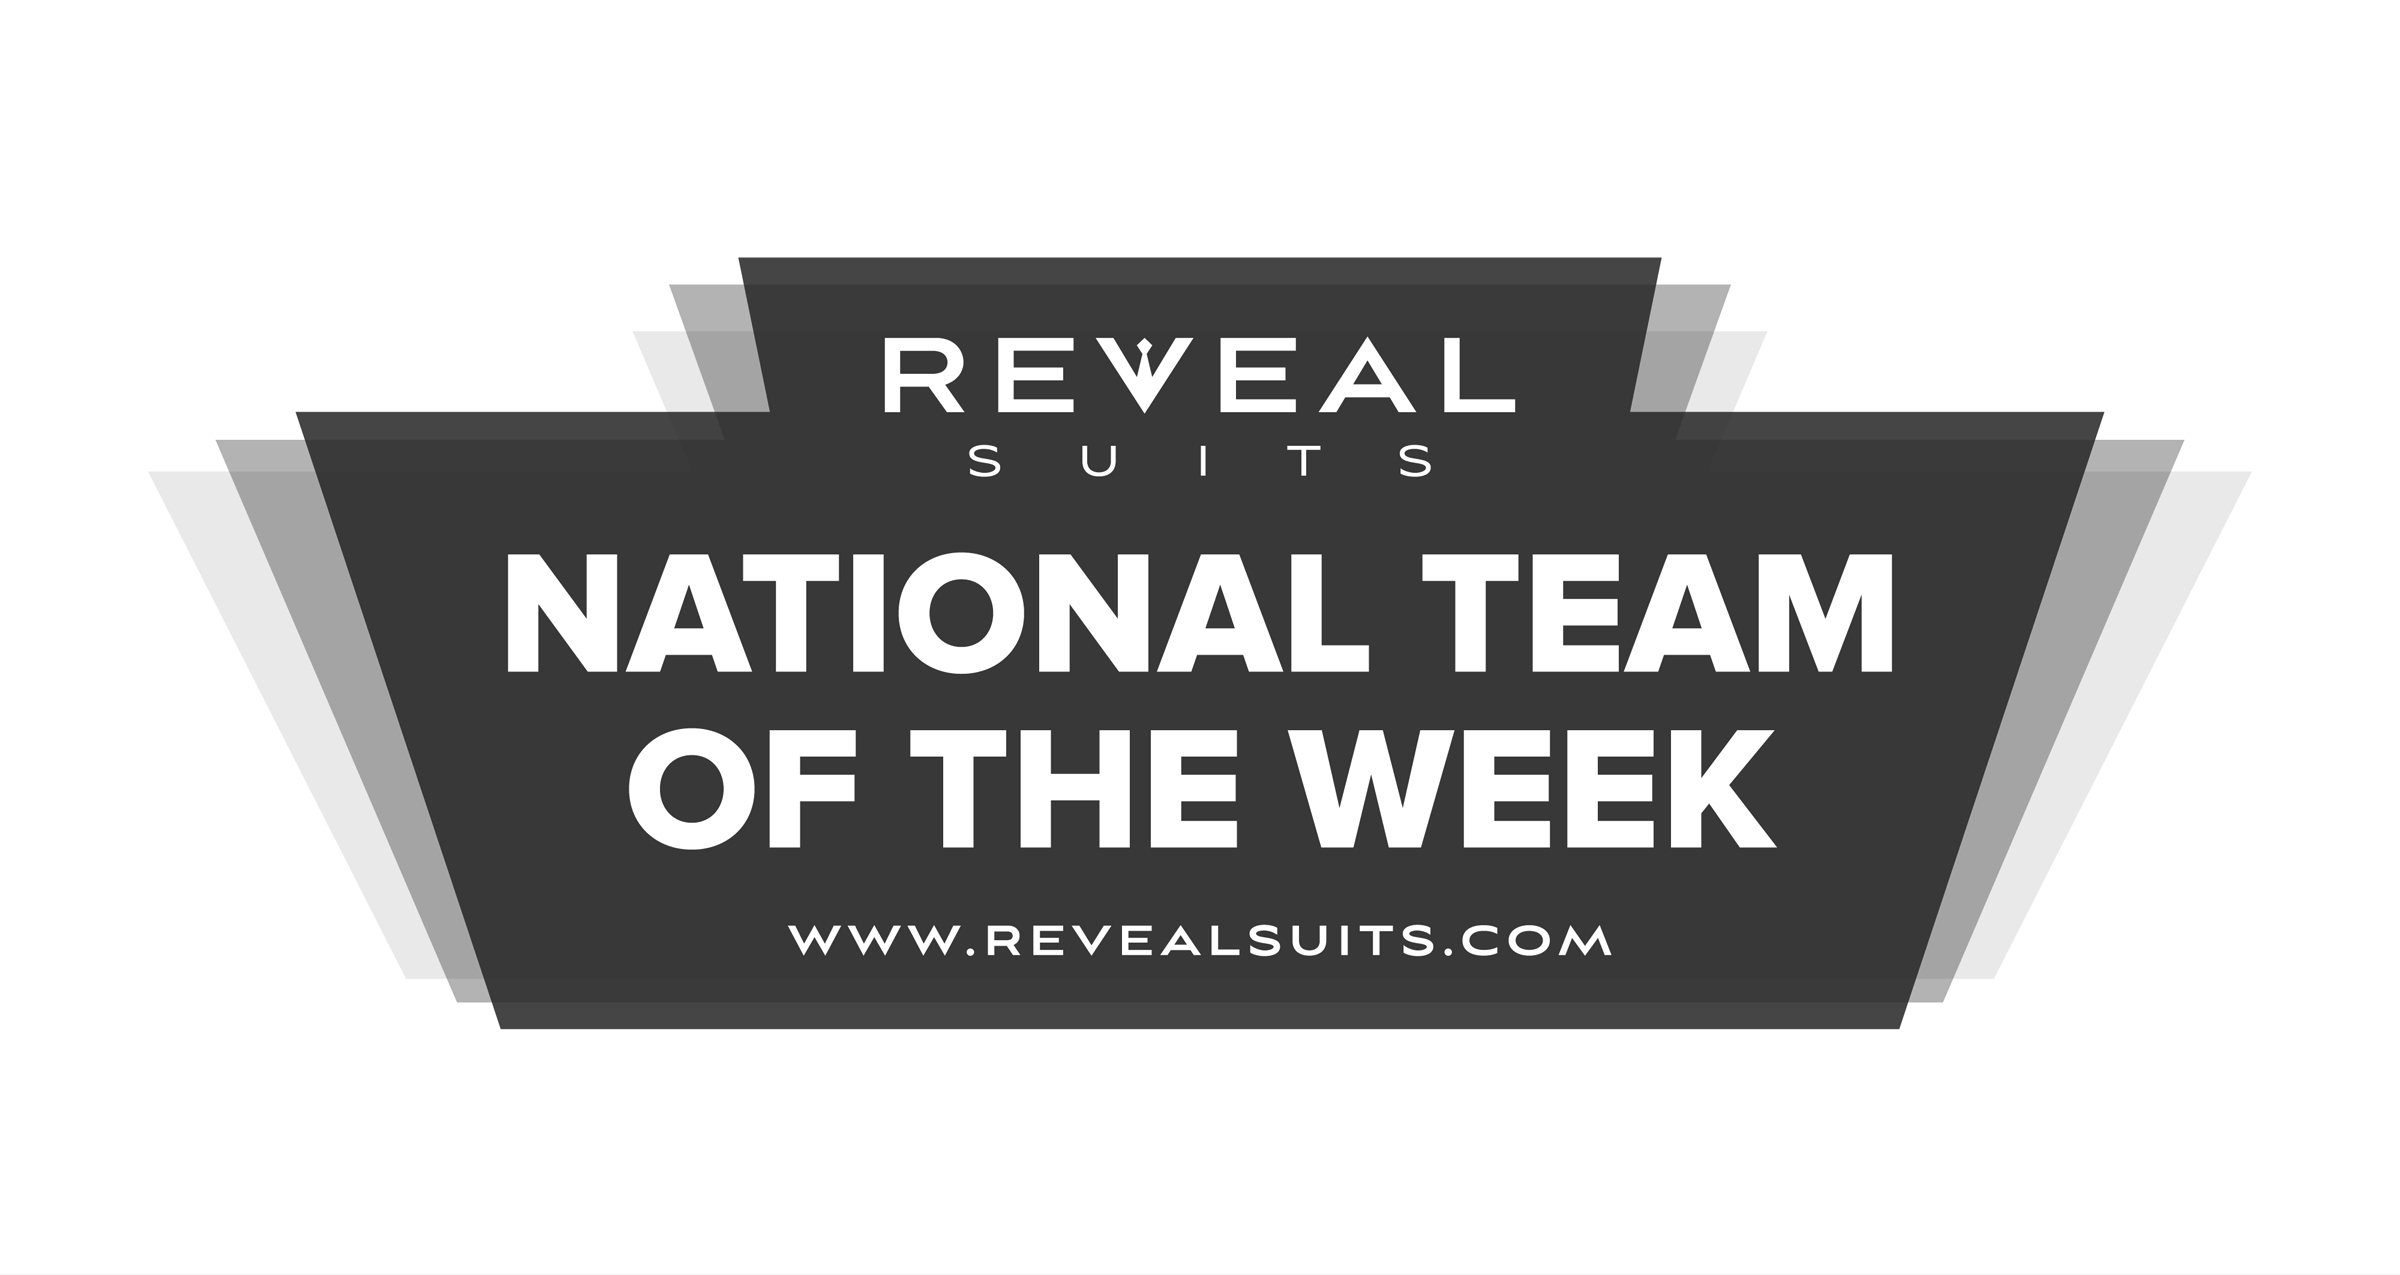 LSU IS REVEAL SUITS NATIONAL TEAM OF THE WEEK